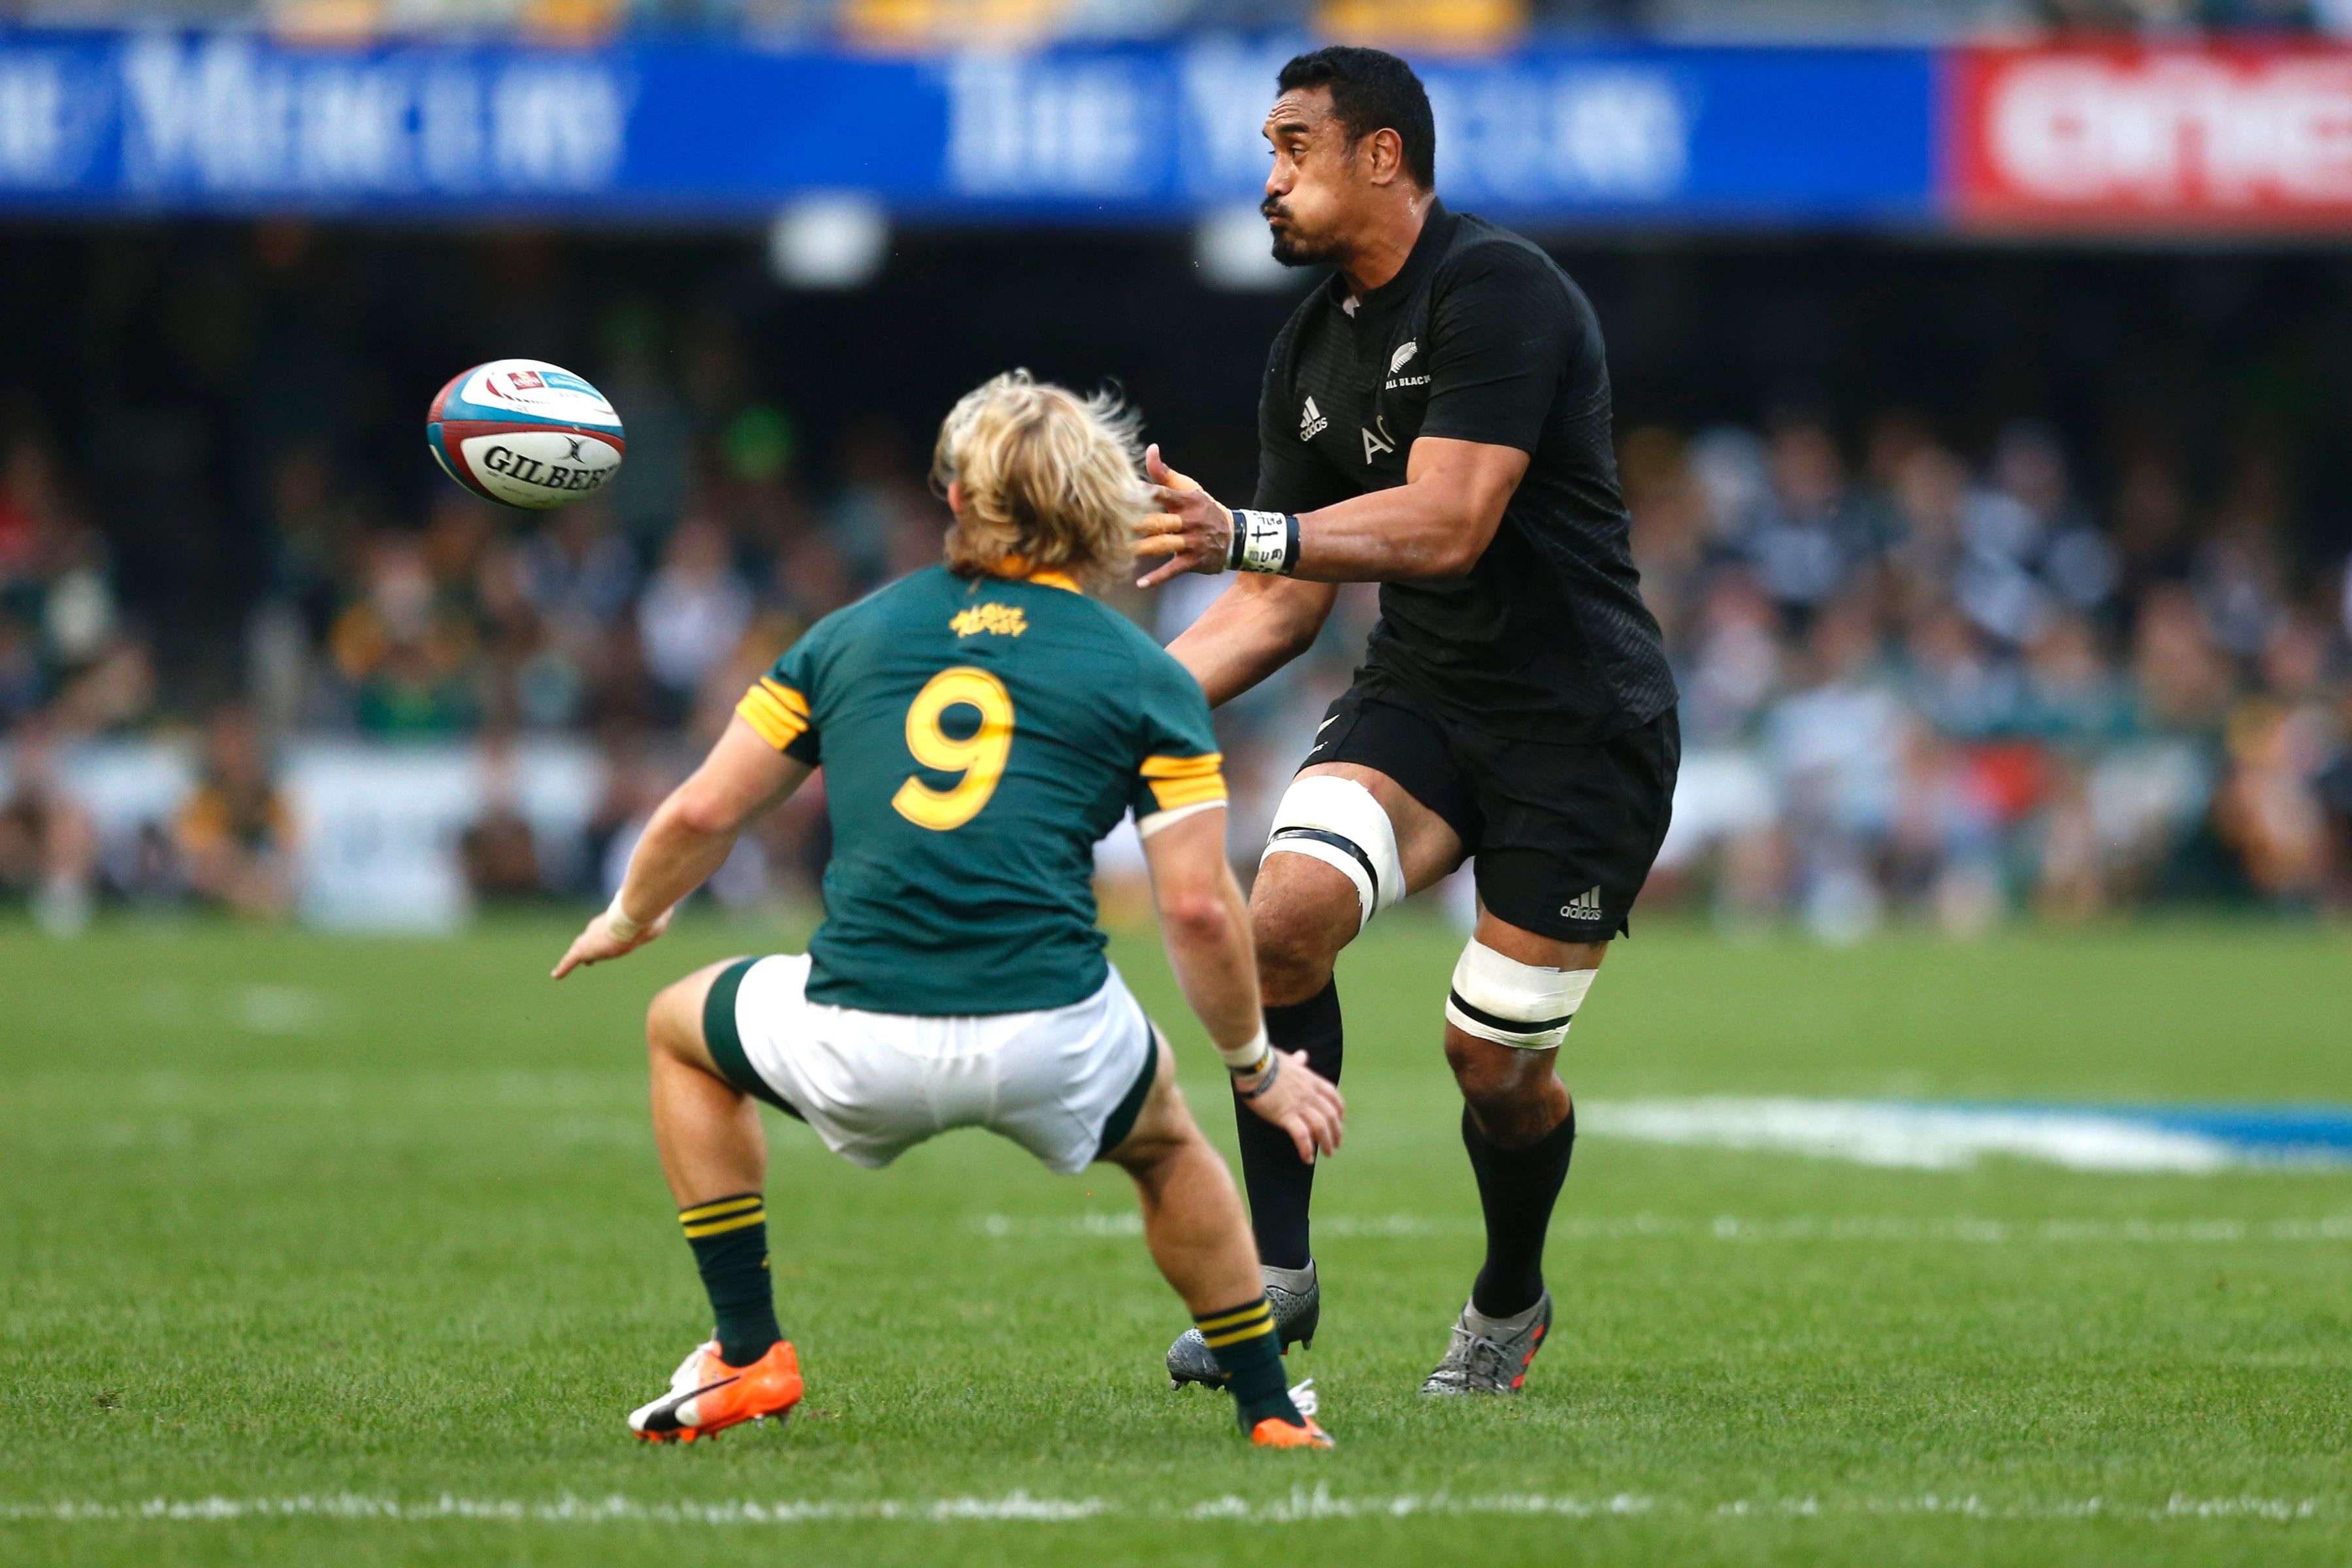 All Blacks flanker Jerome Kaino, pictured clearing the ball against South Africa during the Rugby Championship, is expecting plenty of fight from the Wallabies on Saturday. Photos: AFP